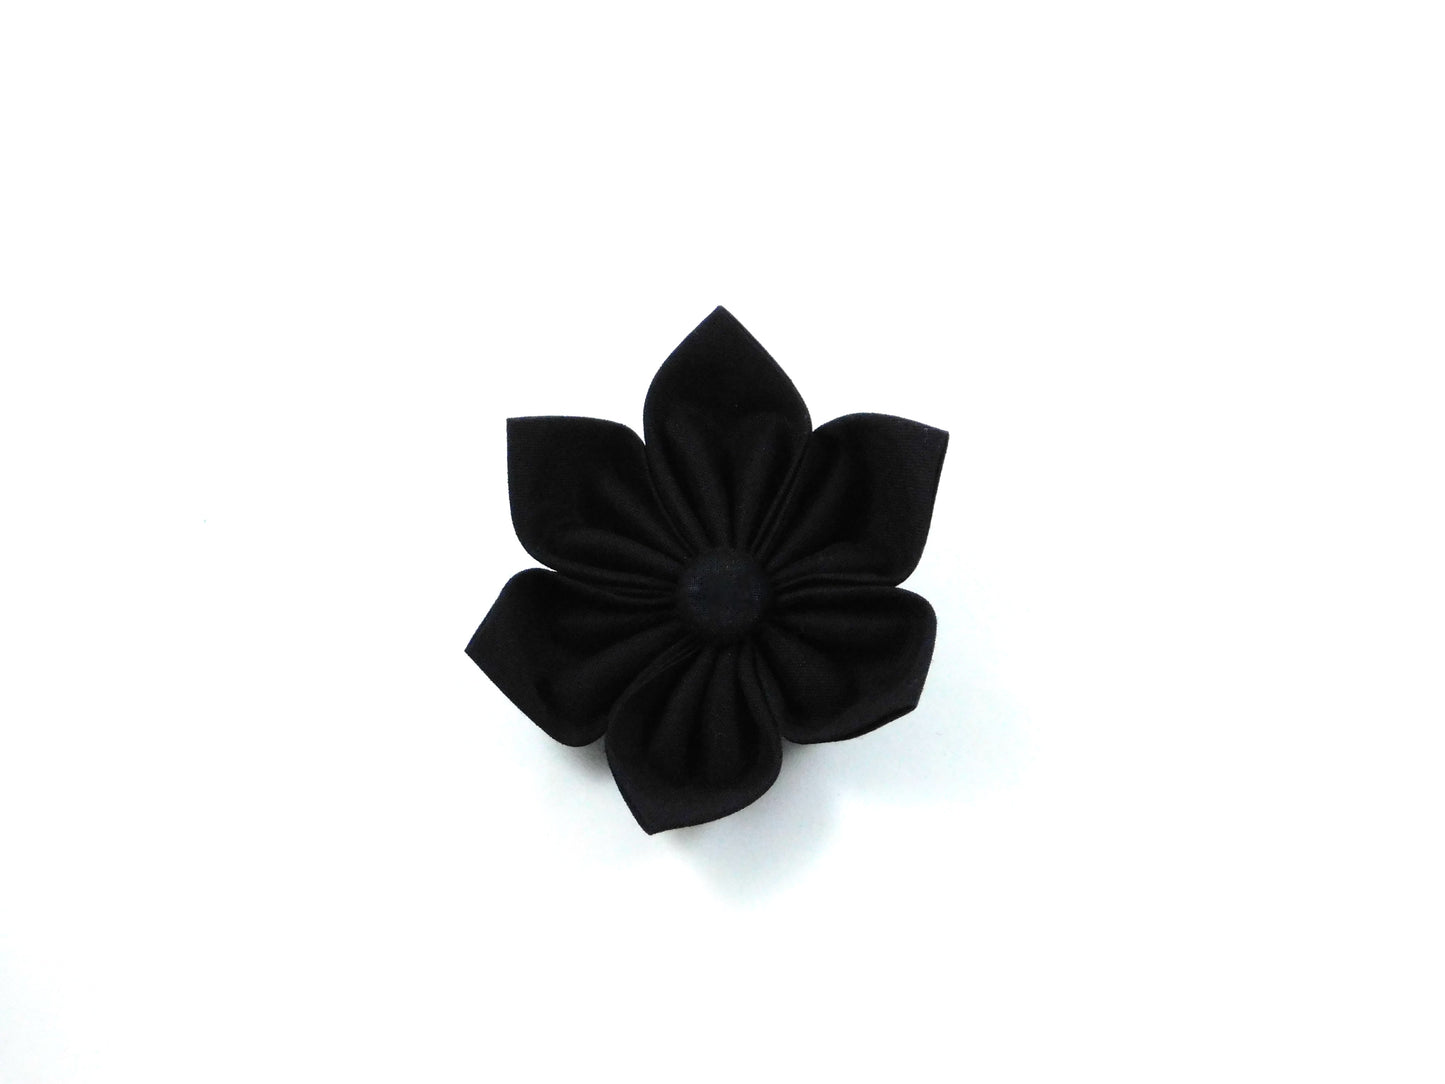 Black Dog and Cat Bow Tie/Collar Flower